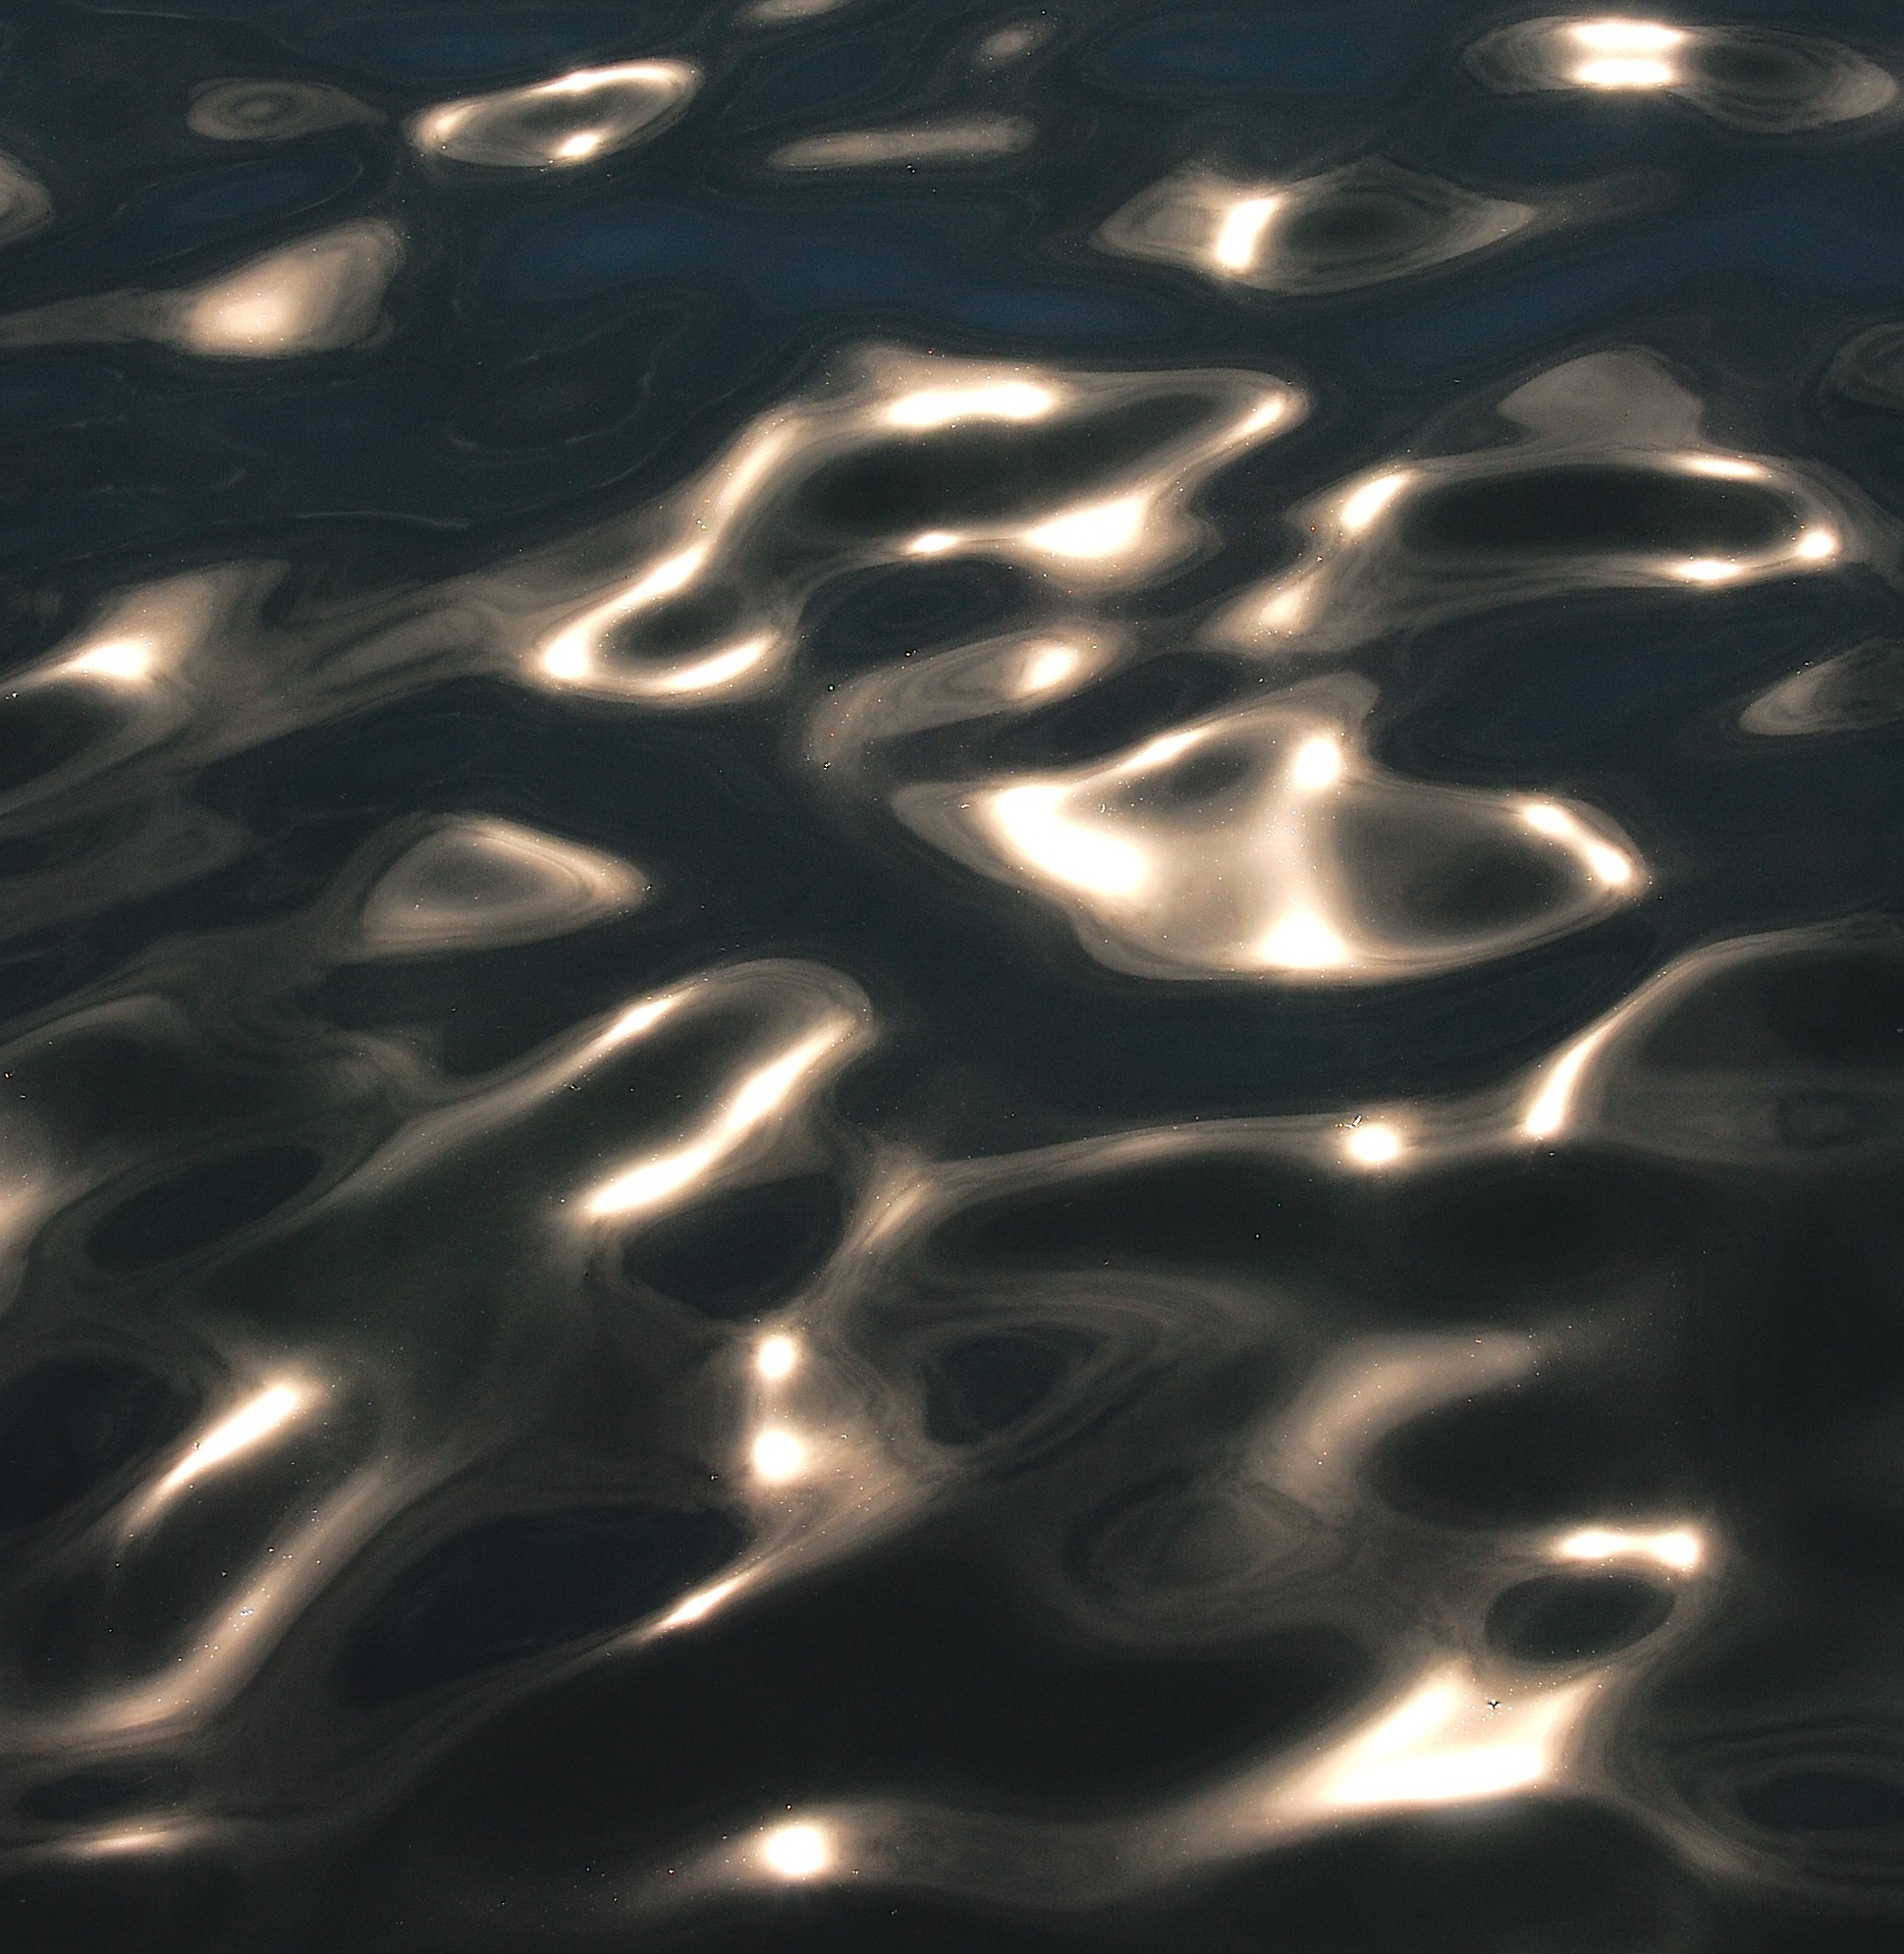 Sun glinting on water's surface